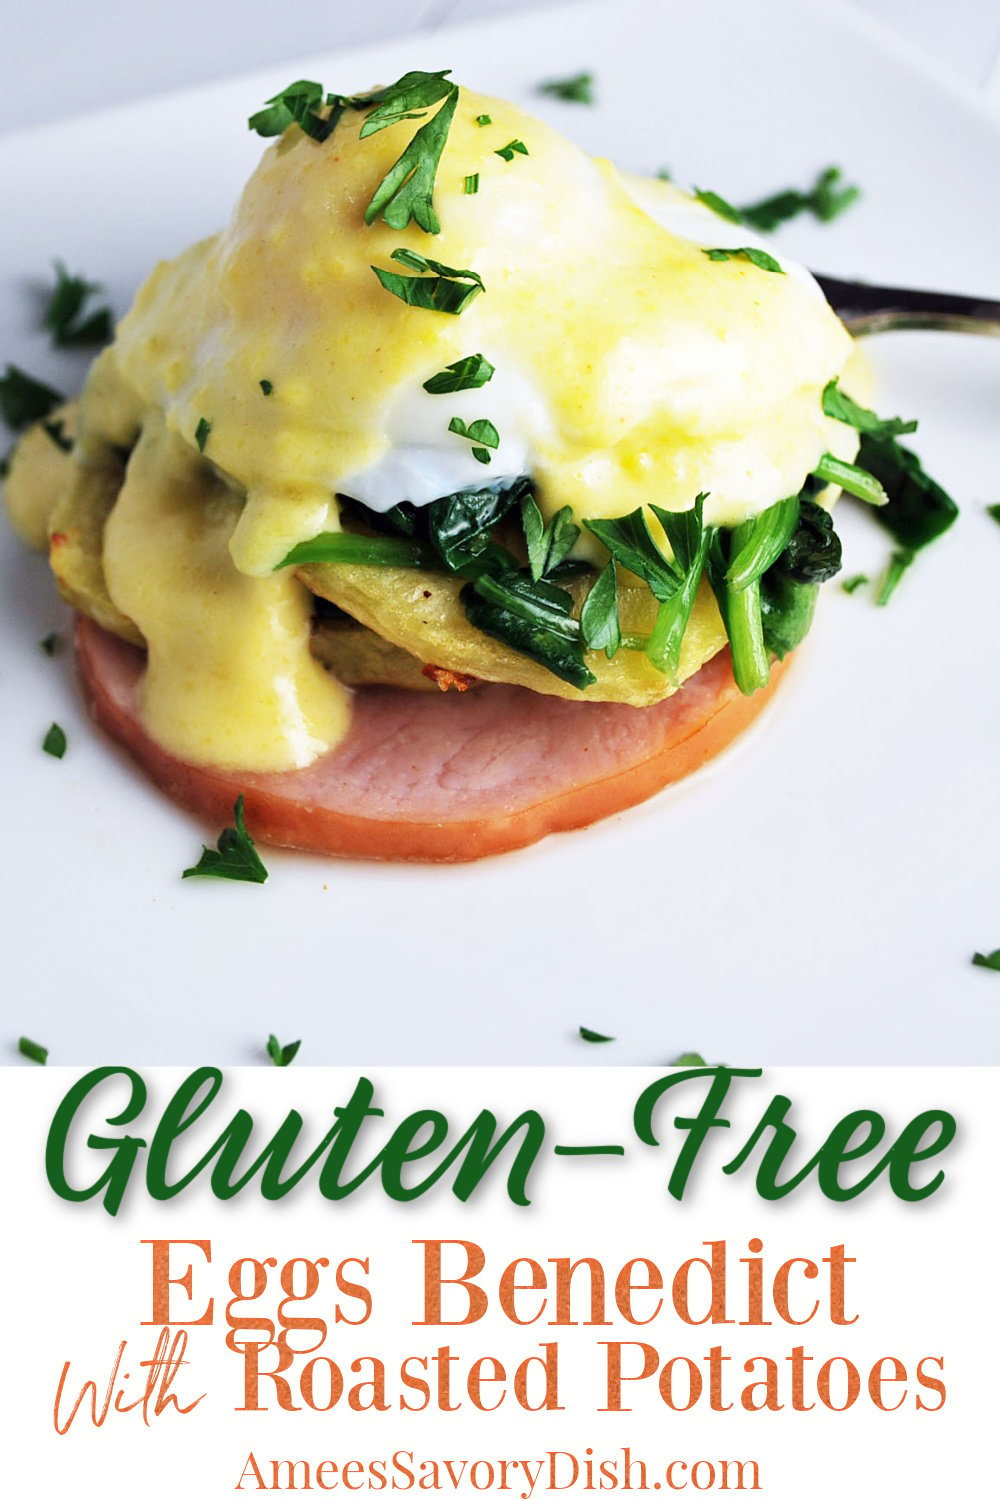 A delicious whole-food recipe for gluten-free eggs benedict made with thinly sliced potatoes, Canadian bacon, spinach, poached eggs, and hollandaise sauce.  #eggsbenedict #glutenfree #glutenfreerecipes #breakfastrecipe via @Ameessavorydish